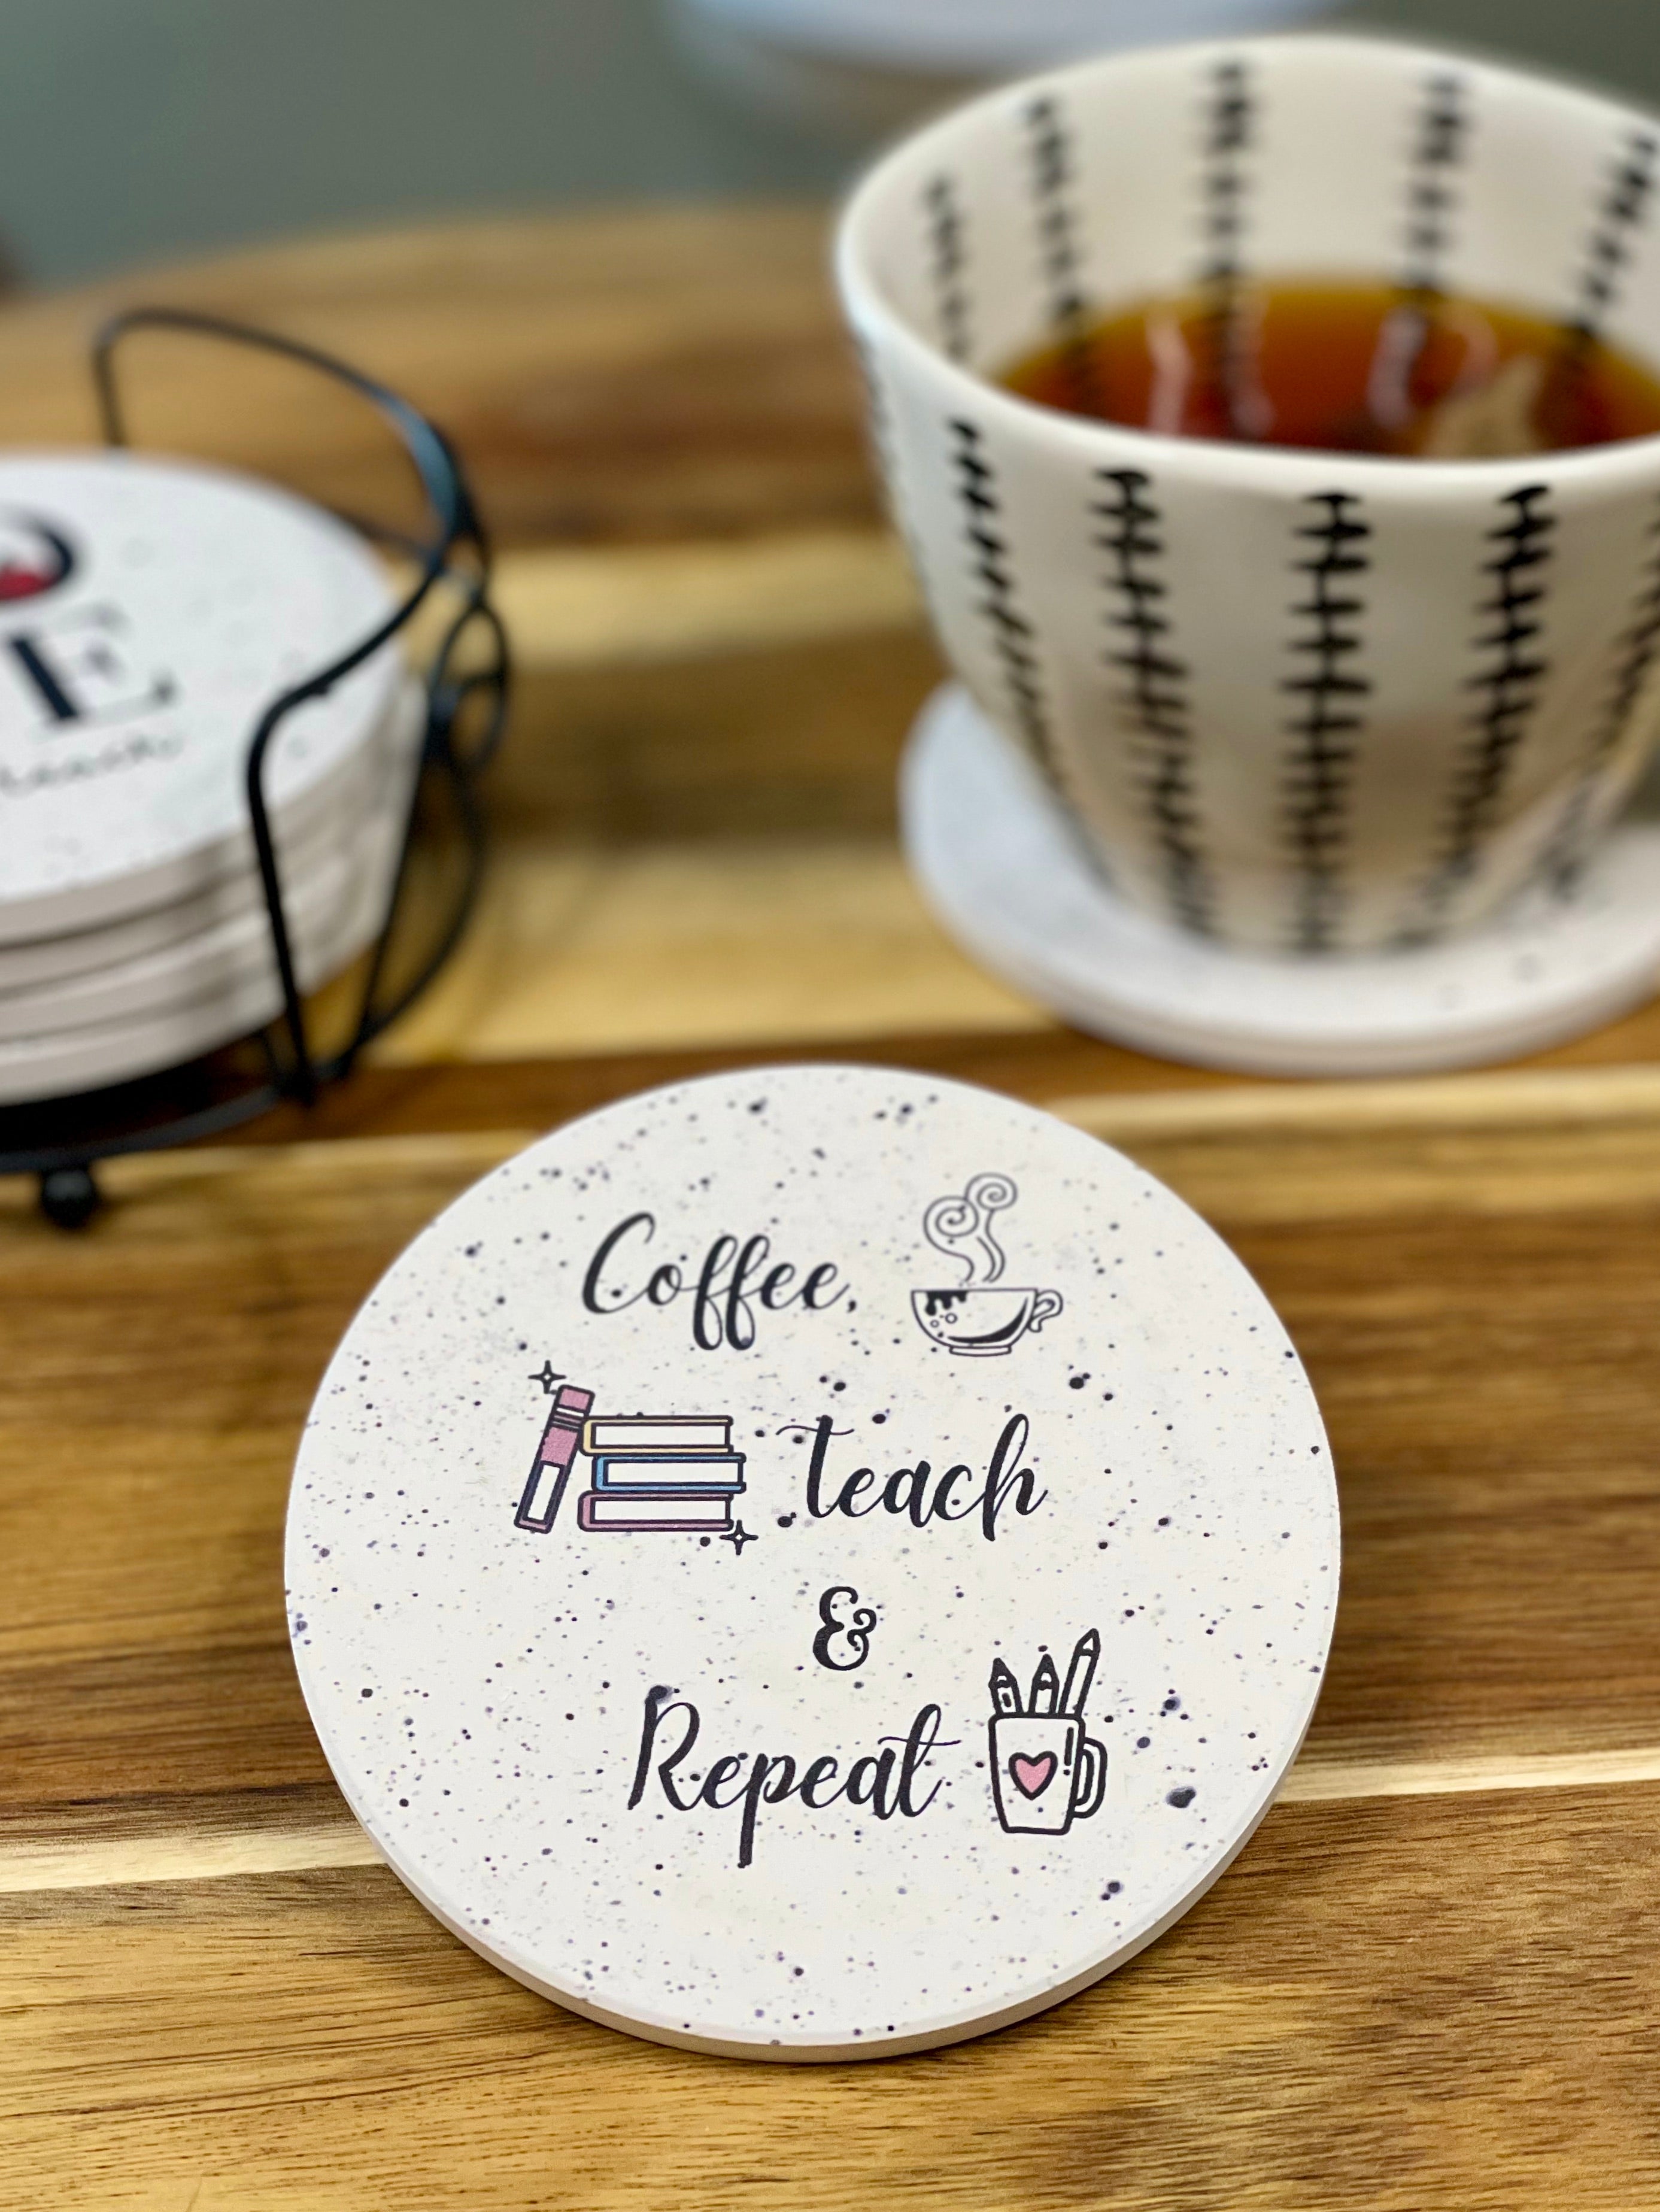 Best Teacher Gifts for Women - Teacher Appreciation Gifts - Absorbent Ceramic Coasters 6pc - Metal Holder & Cylinder Kraft Gift Box Included (Sincere) - KCT Store